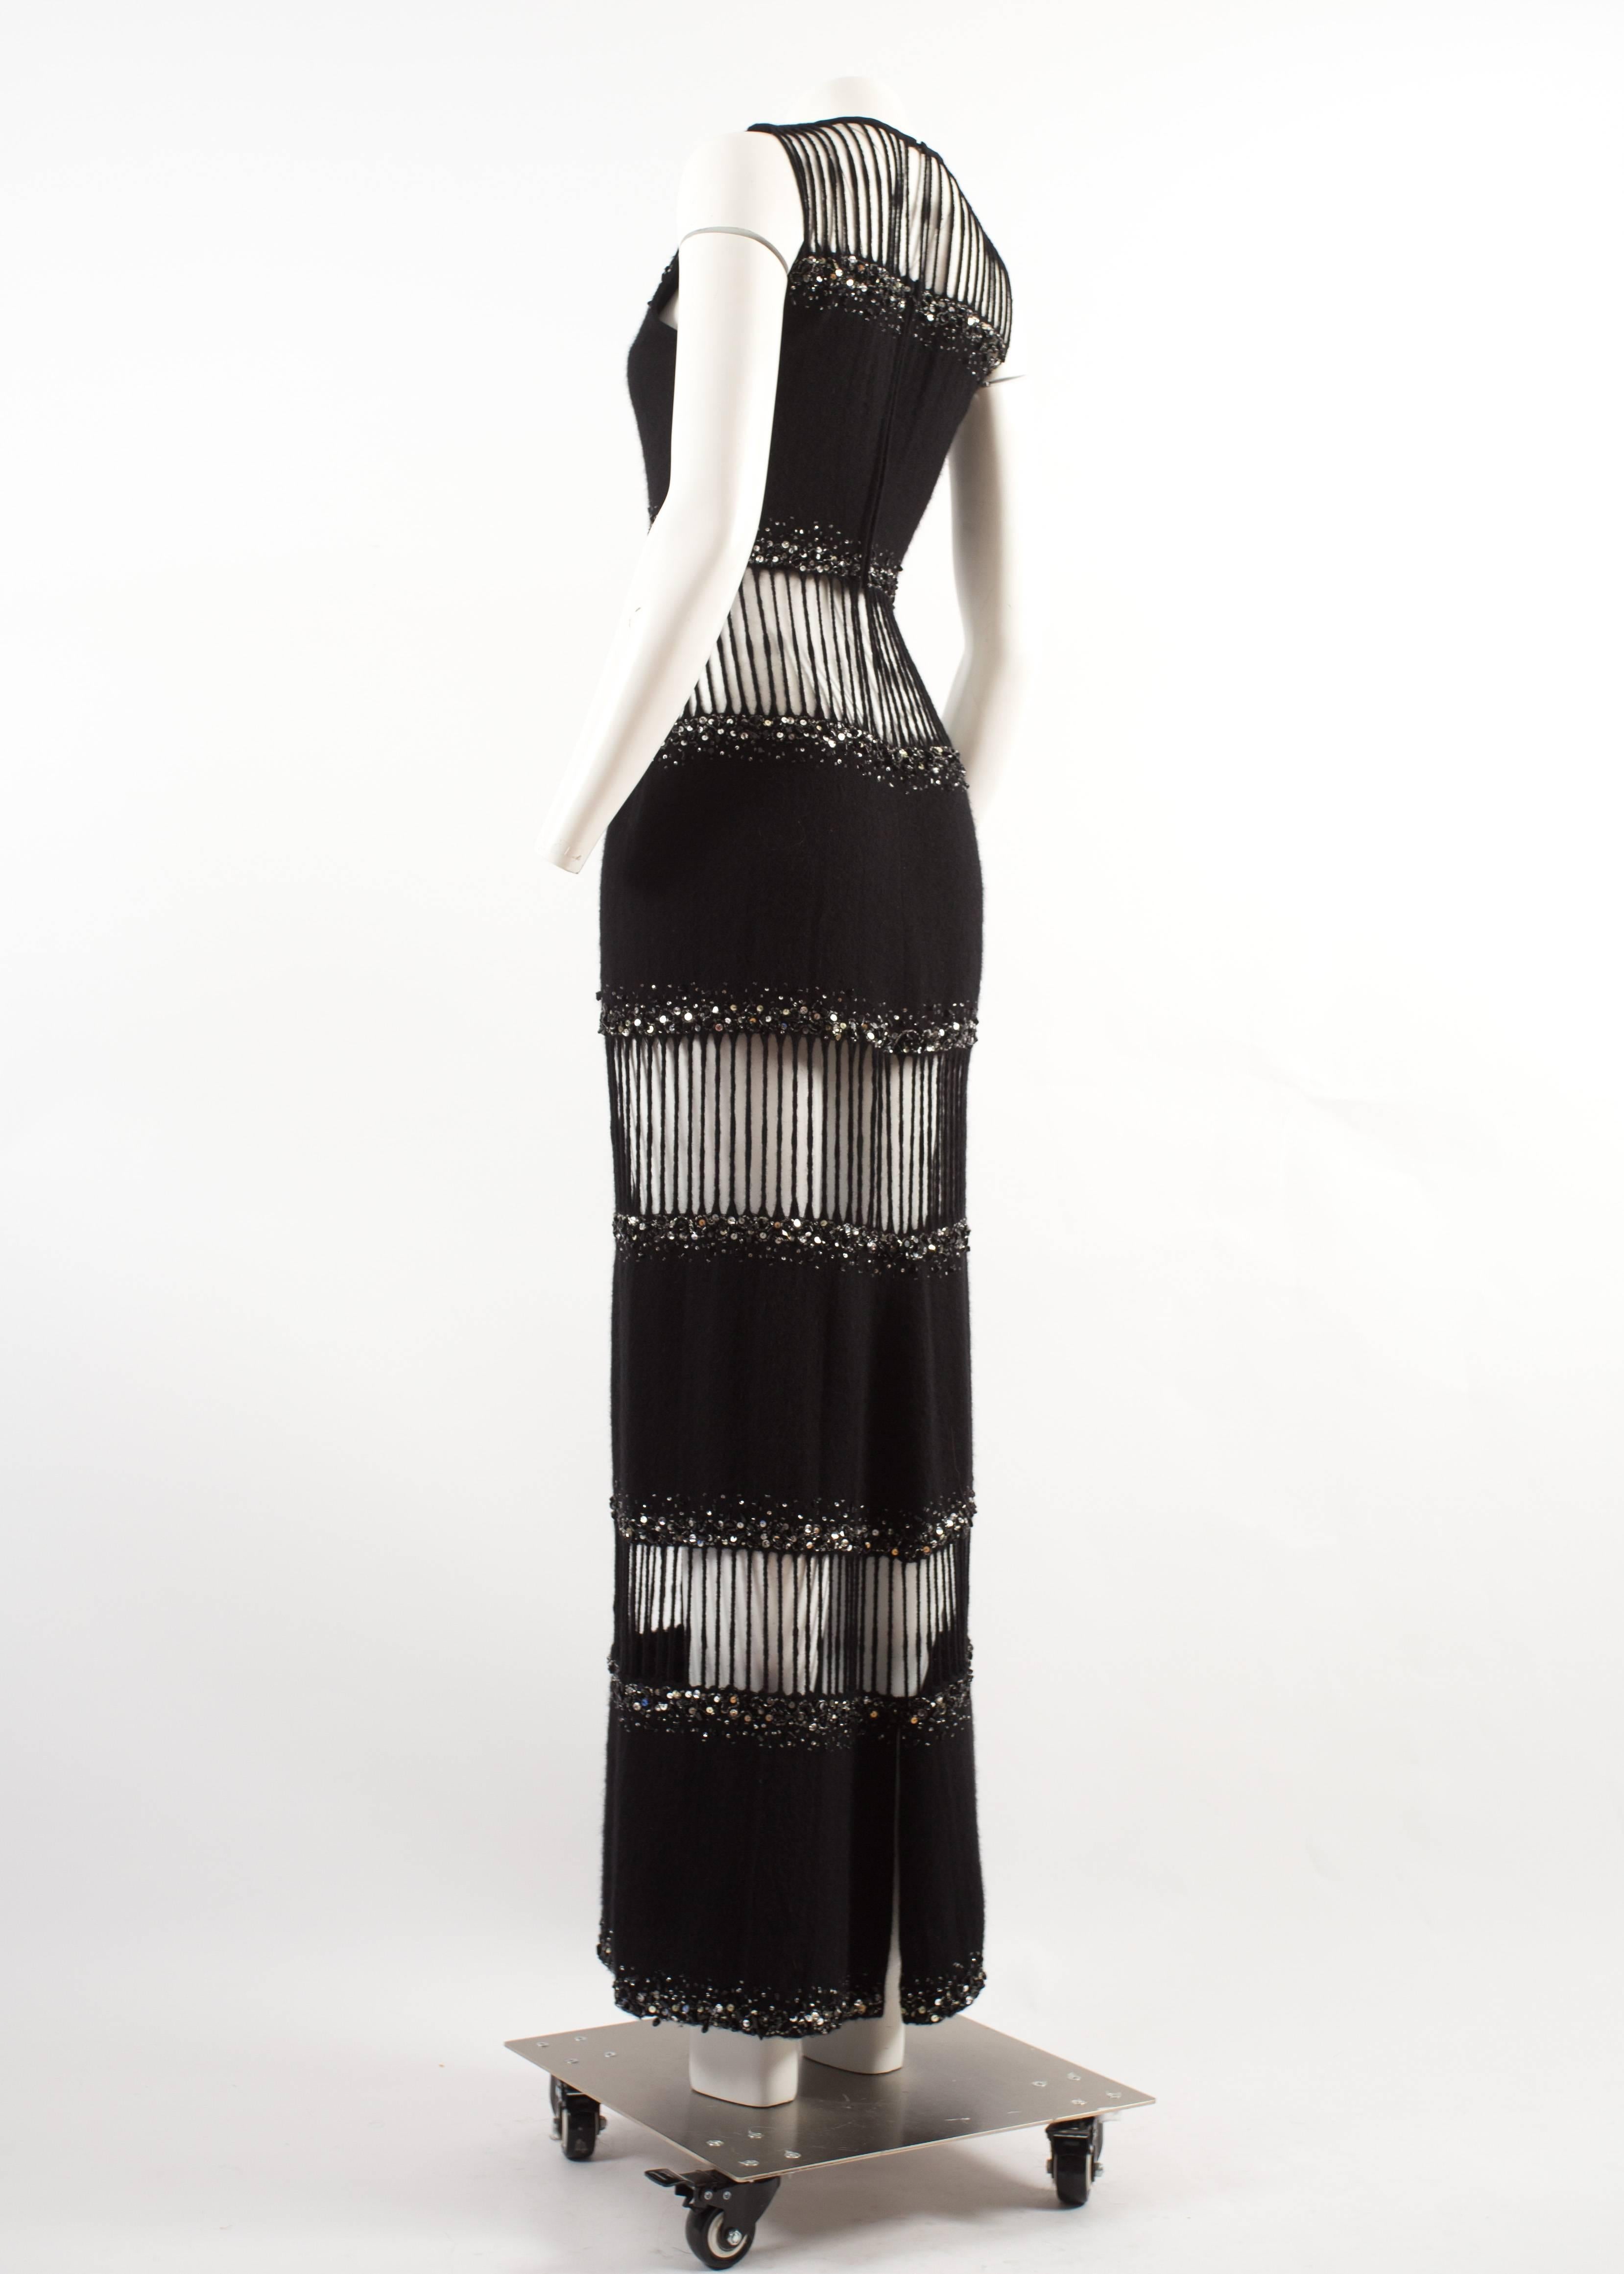 Women's Hardy Amies 1960s couture embellished column evening dress with cutouts